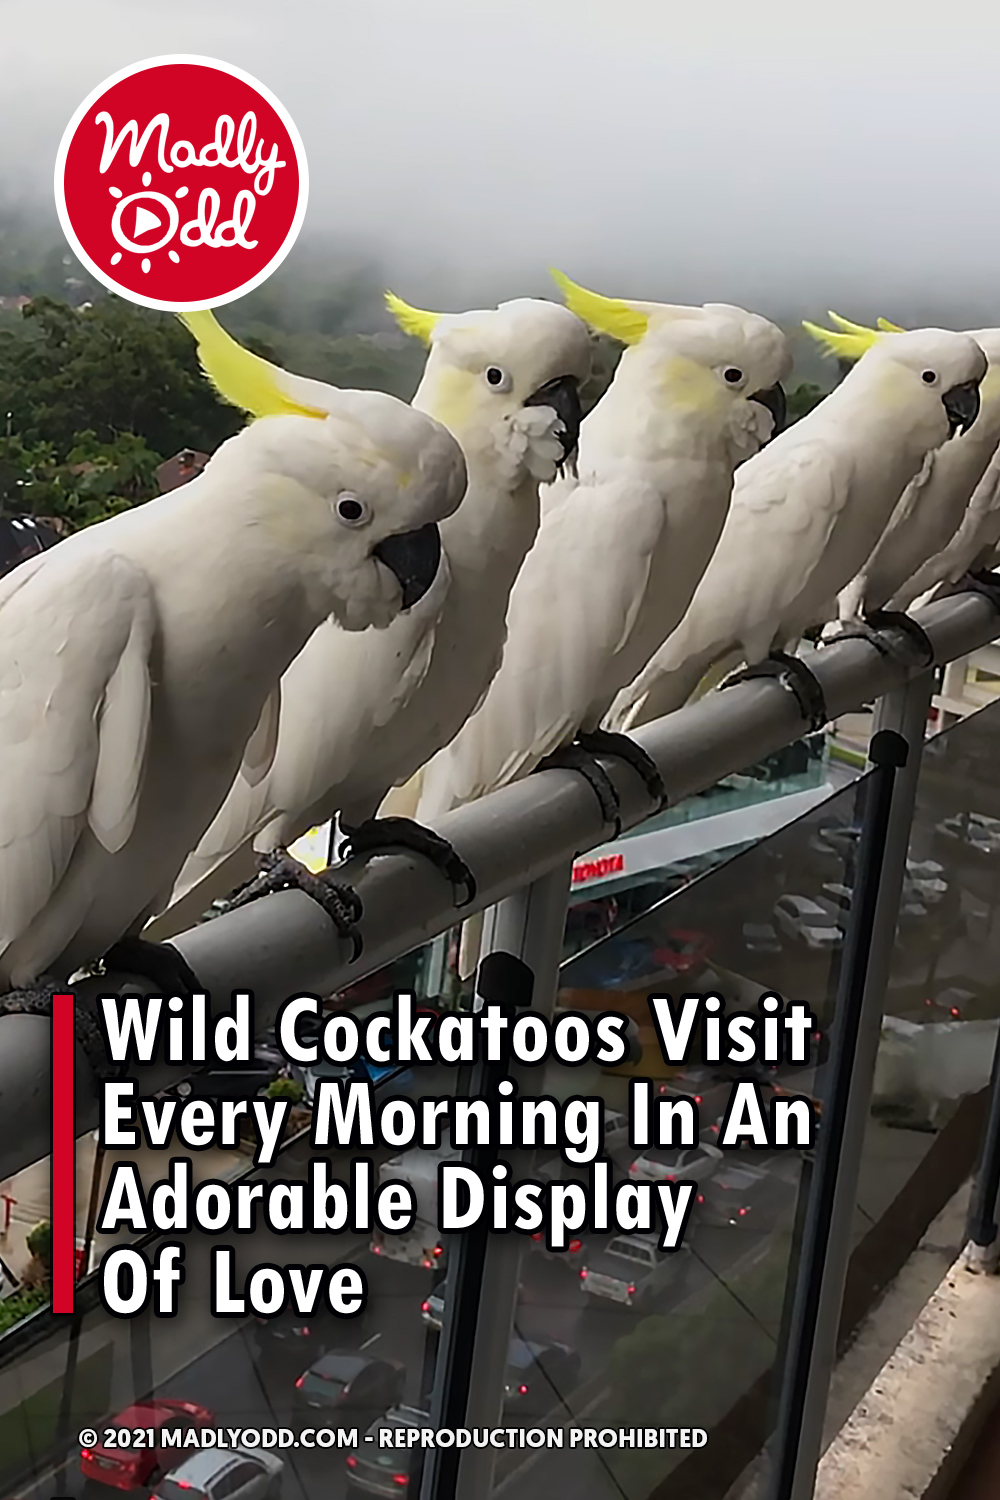 Wild Cockatoos Visit Every Morning In An Adorable Display Of Love